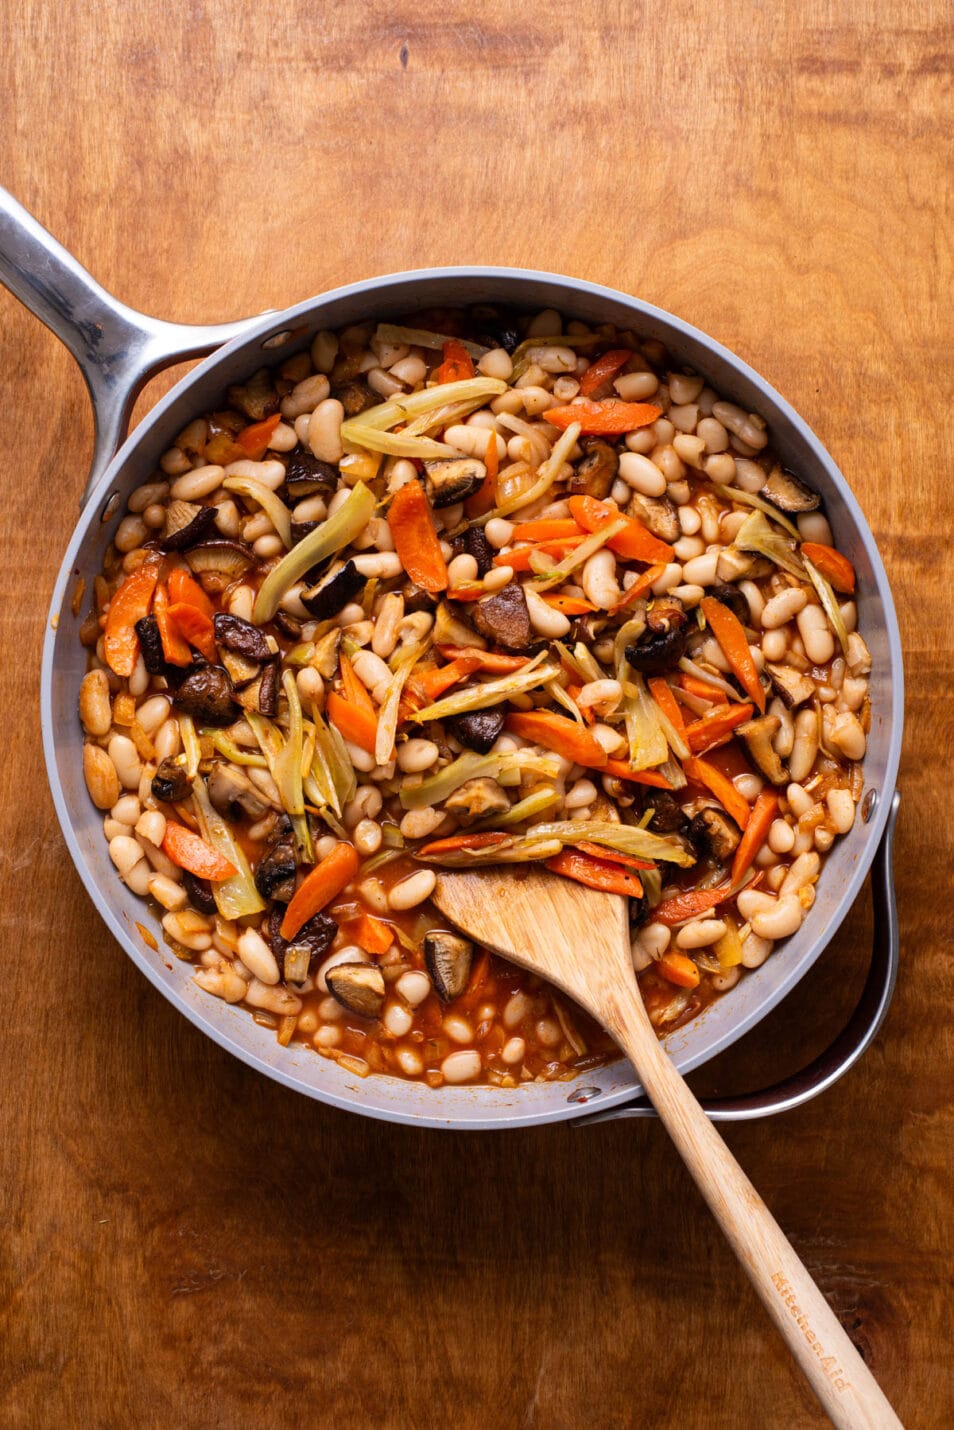 White beans with roasted vegetables stirred together in a skillet.